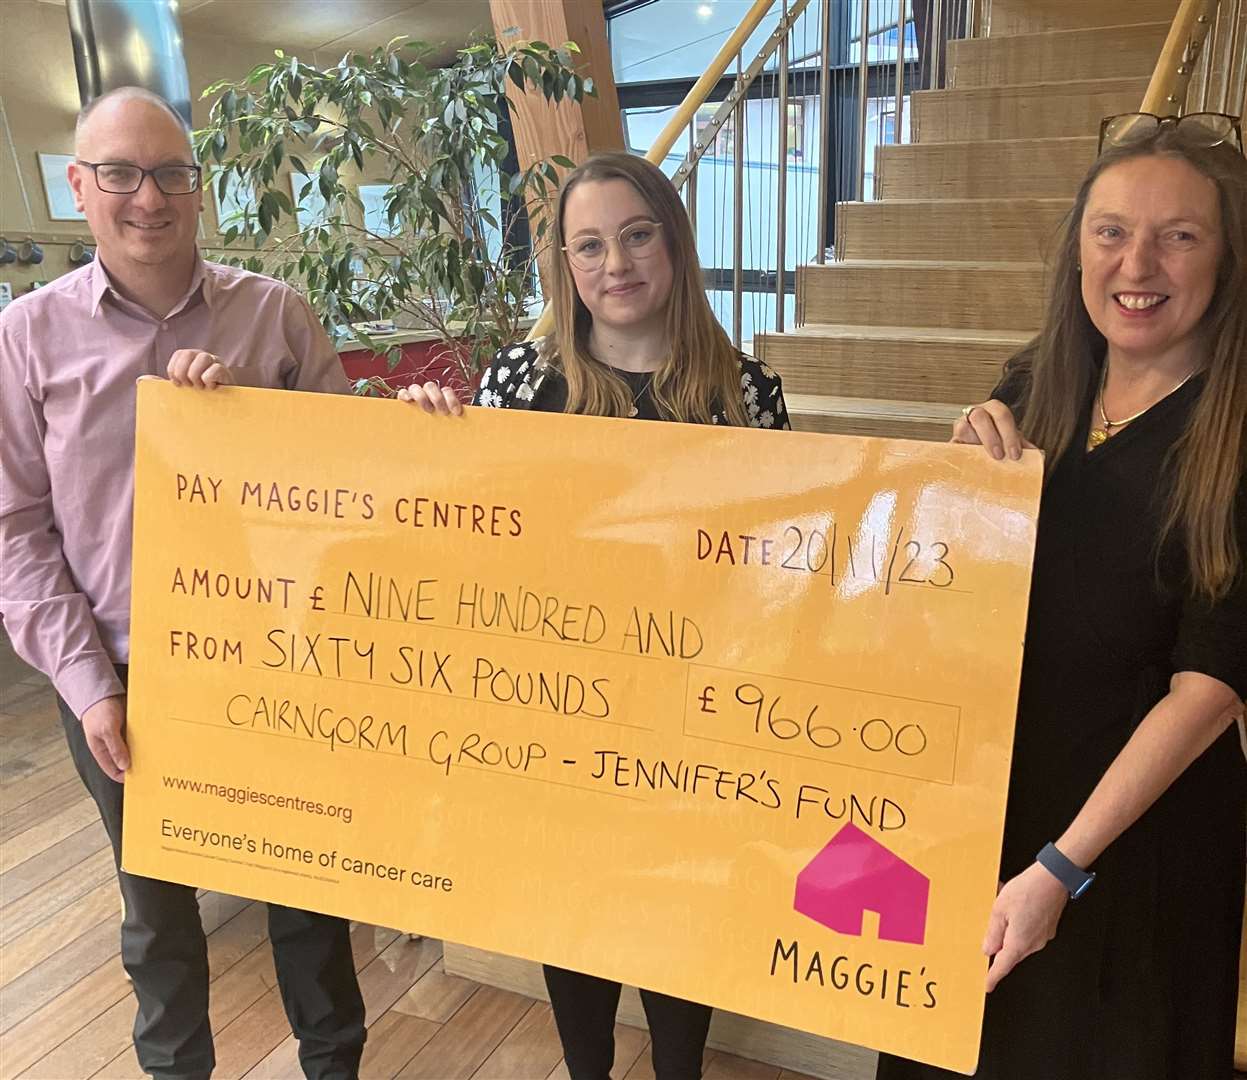 Chris Dowling from Jennifer’s Fund and the Cairngorm Group hands over a cheque for £966 to Claire Davis (centre) and Seonaid Green to fund children’s support groups at Maggie's Highland.